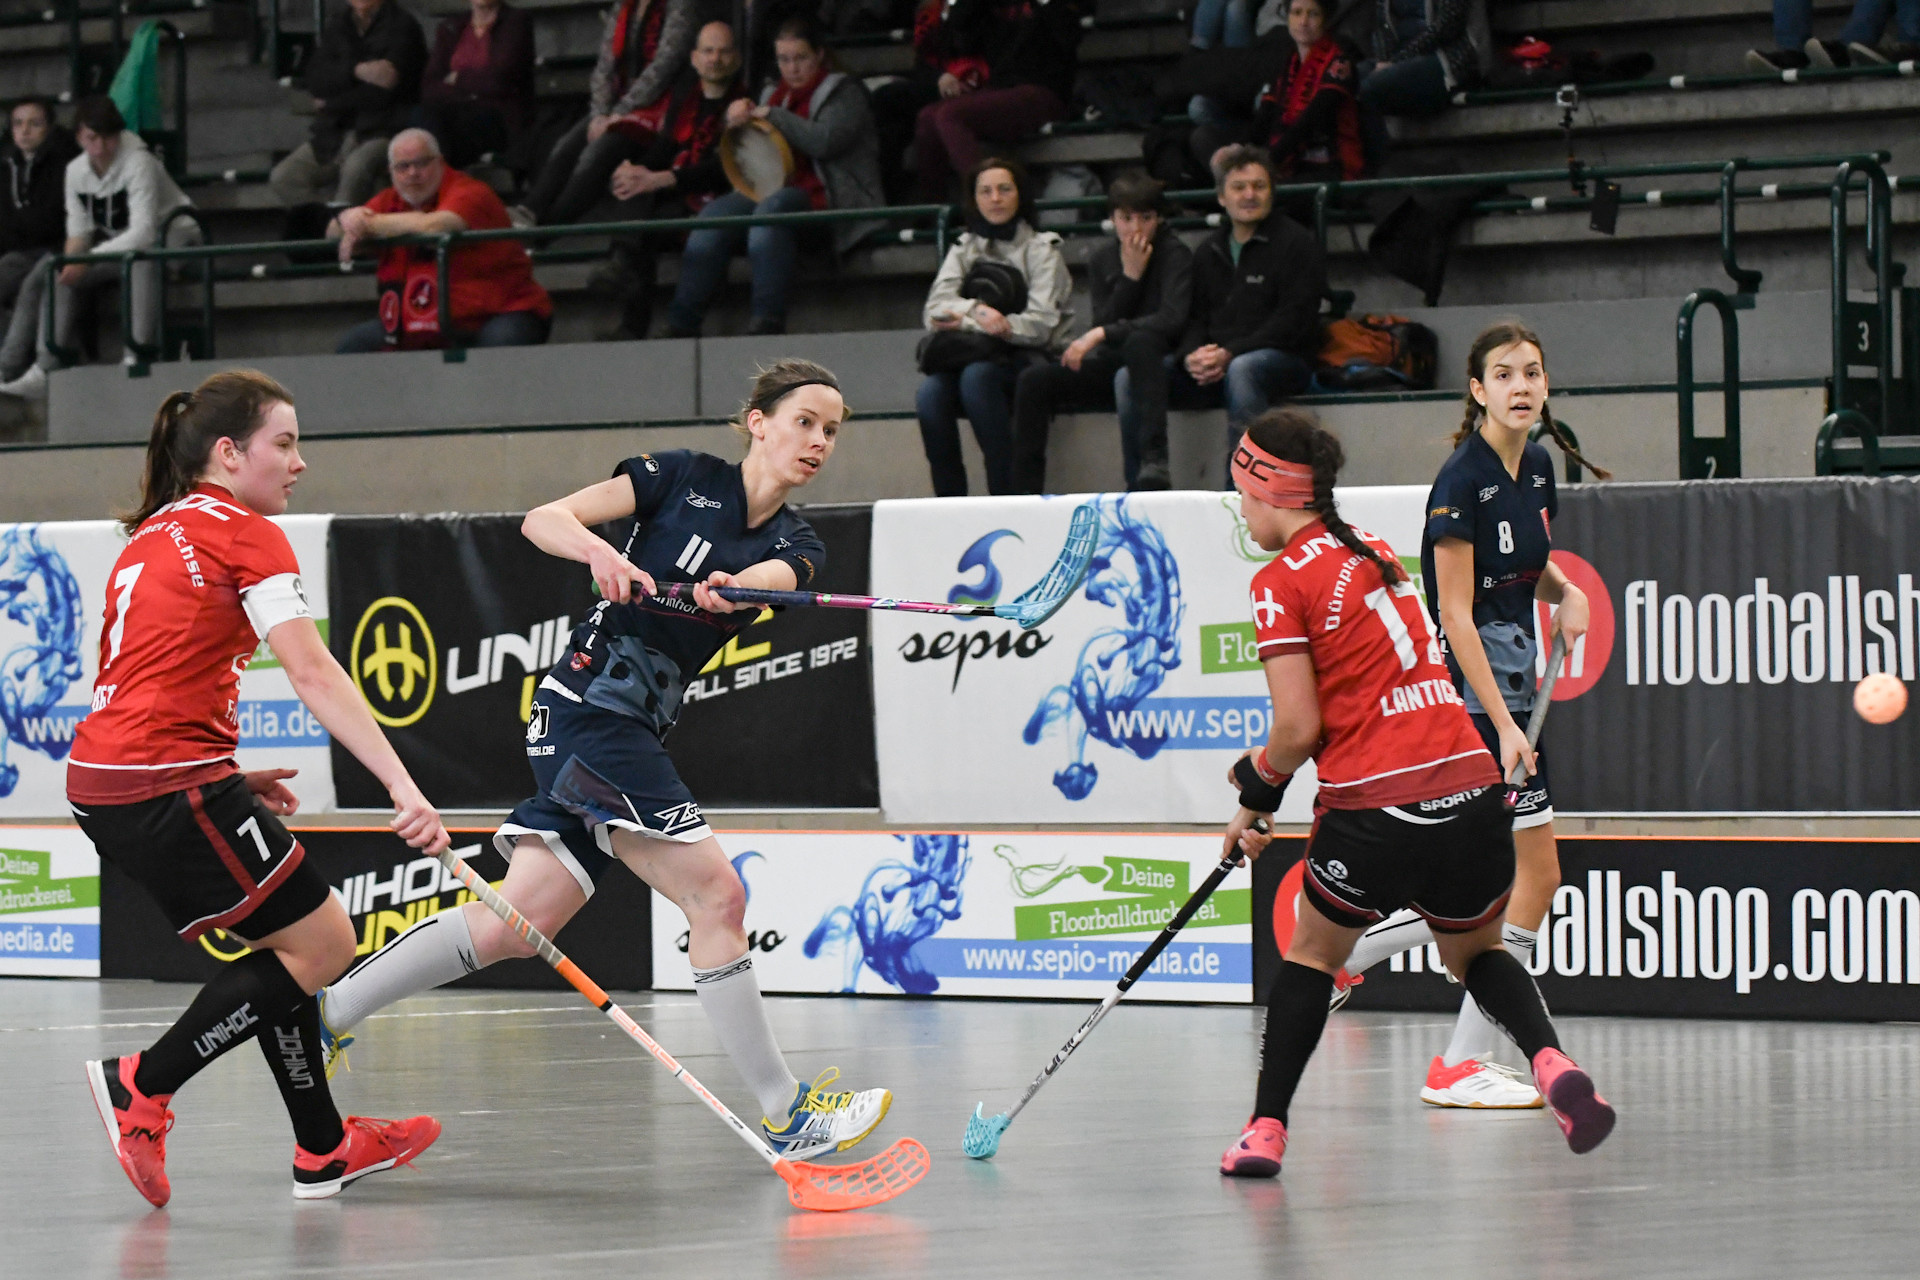 Floorball: The final game at the German League championship, A competitive indoor sport. 1920x1280 HD Wallpaper.